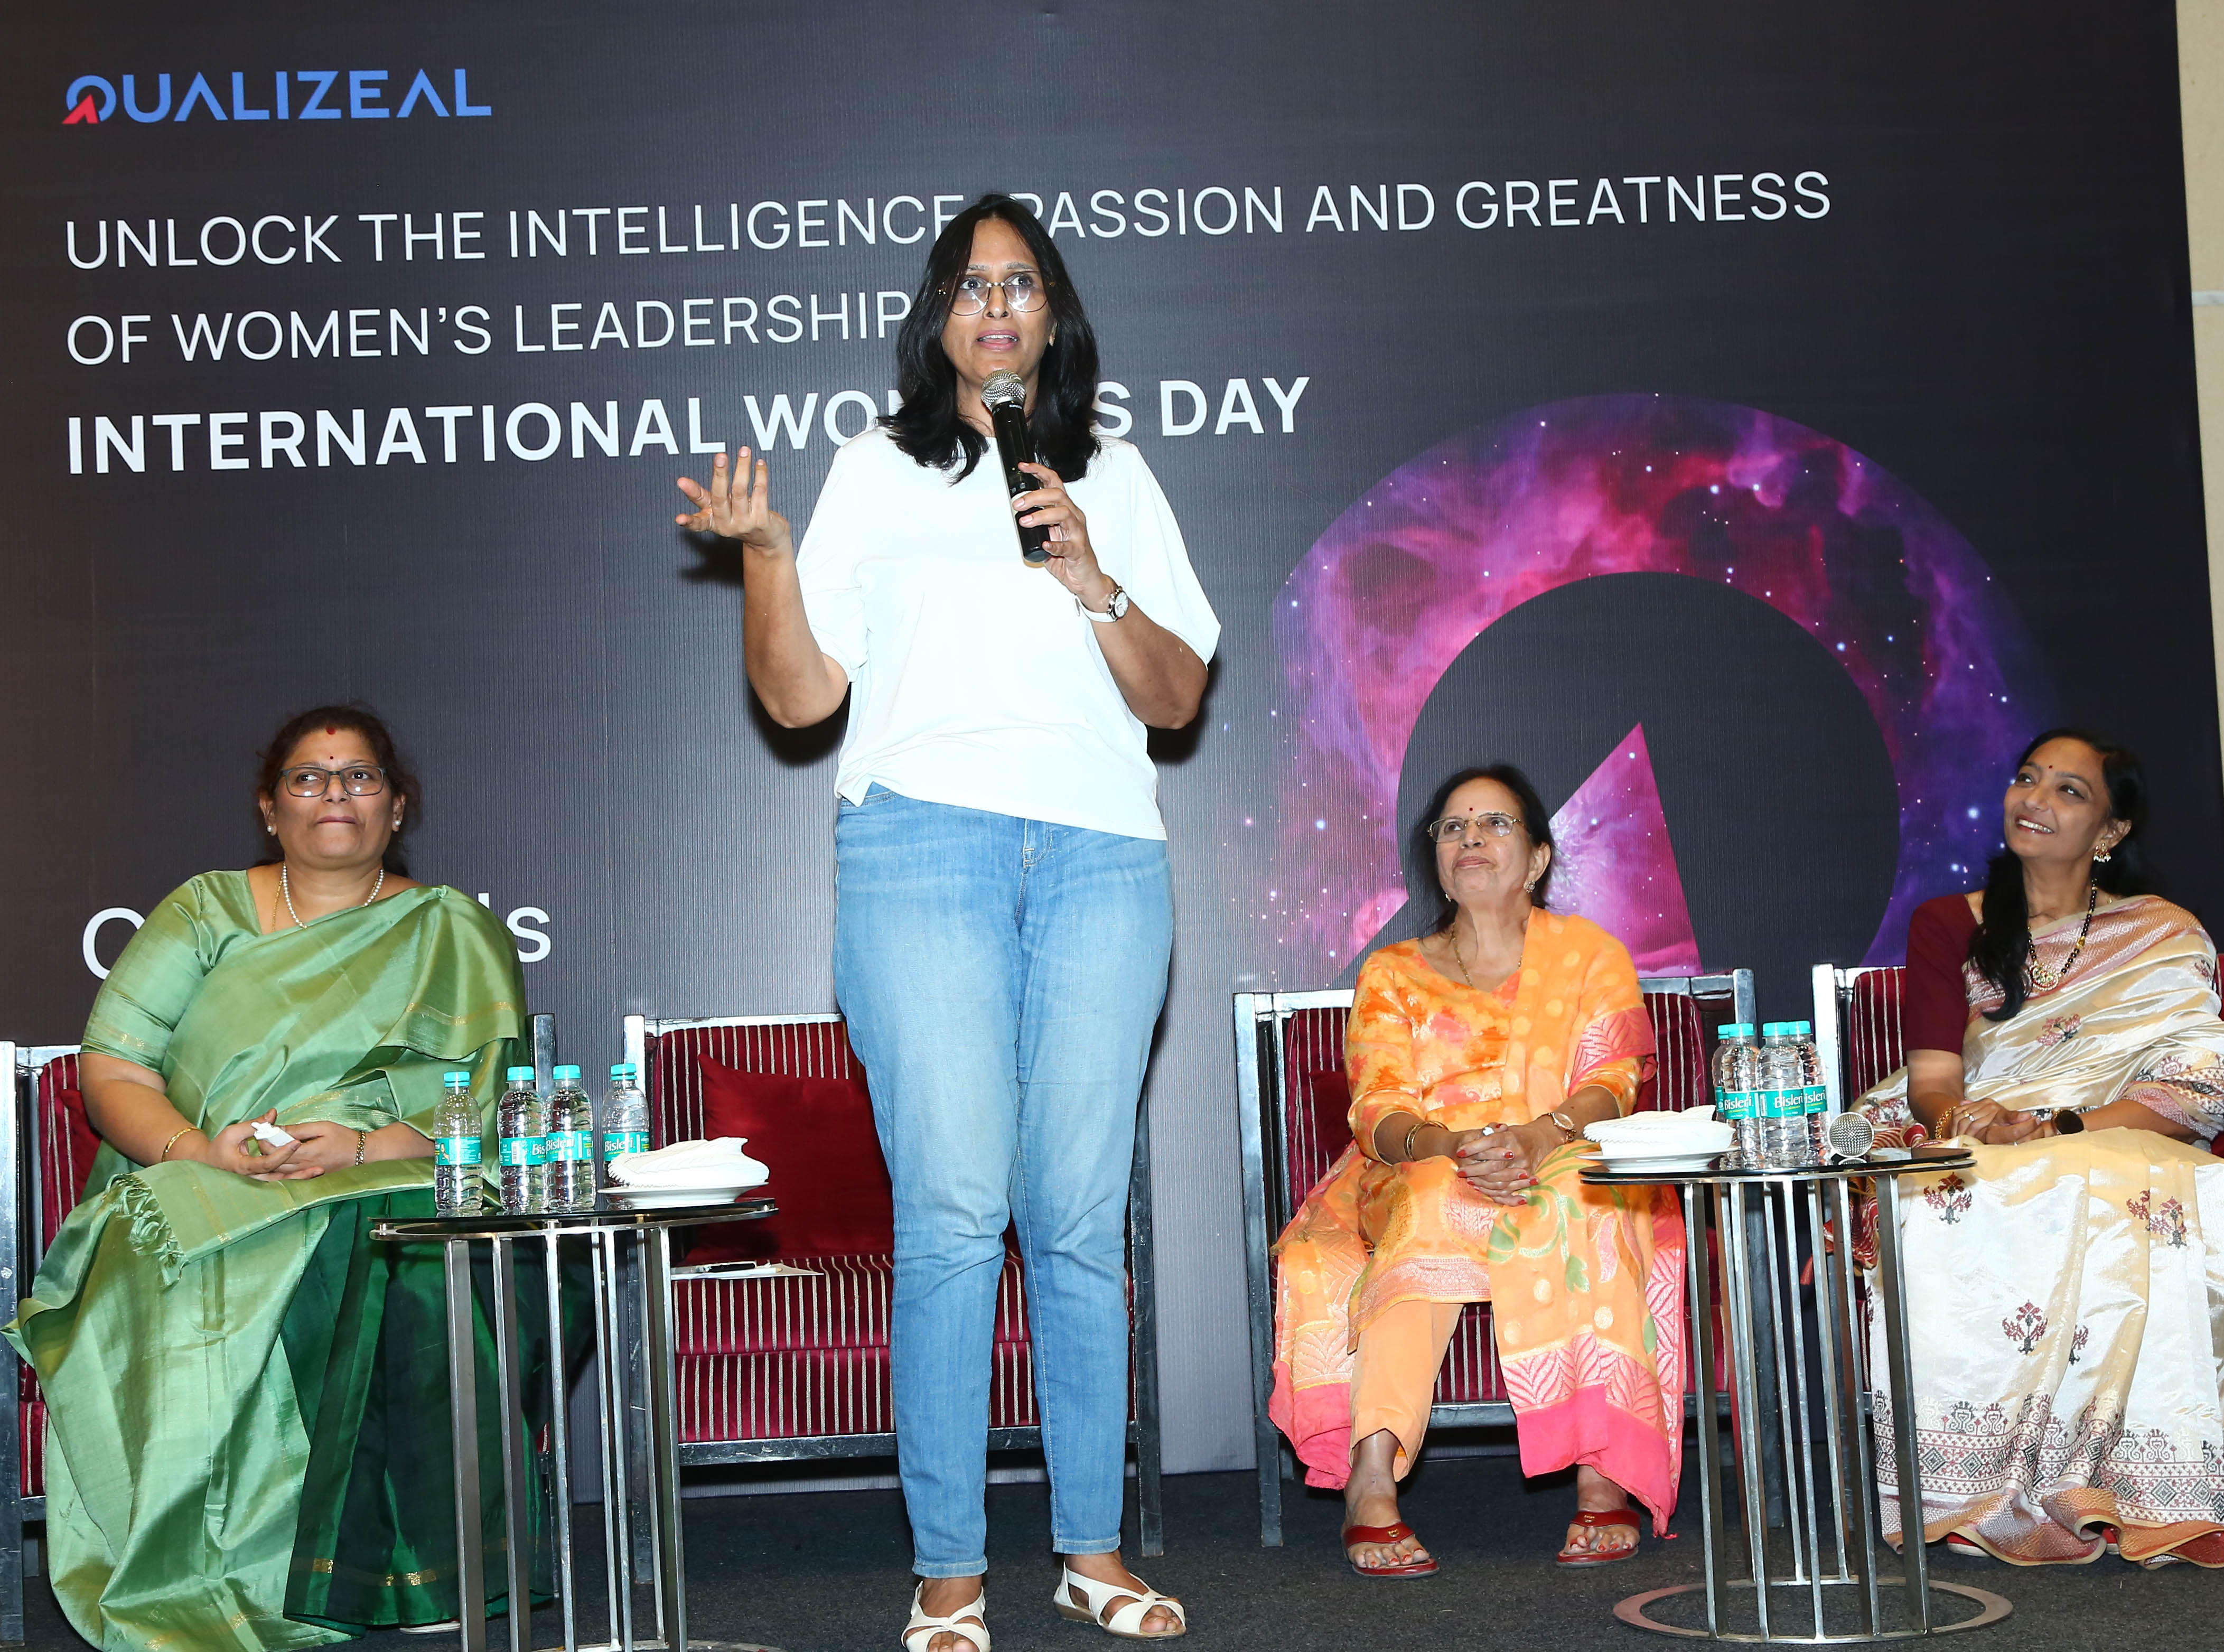 QualiZeal marks International Women’s Day with iconic women leaders